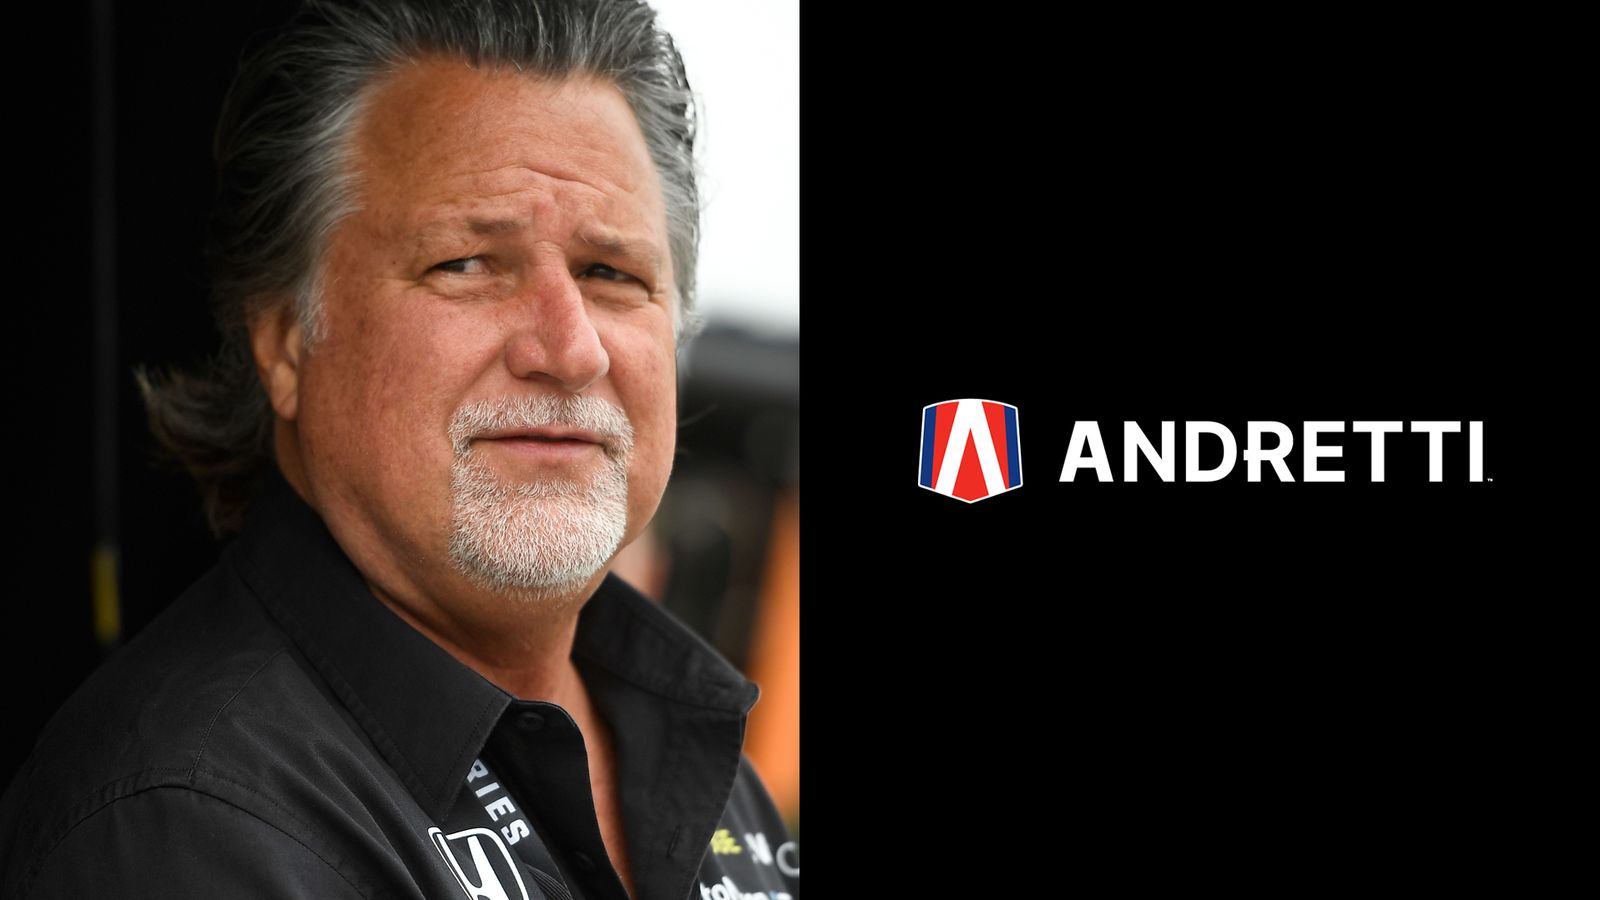 Andretti’s F1 bid given FIA green light as new team one step closer to joining championship